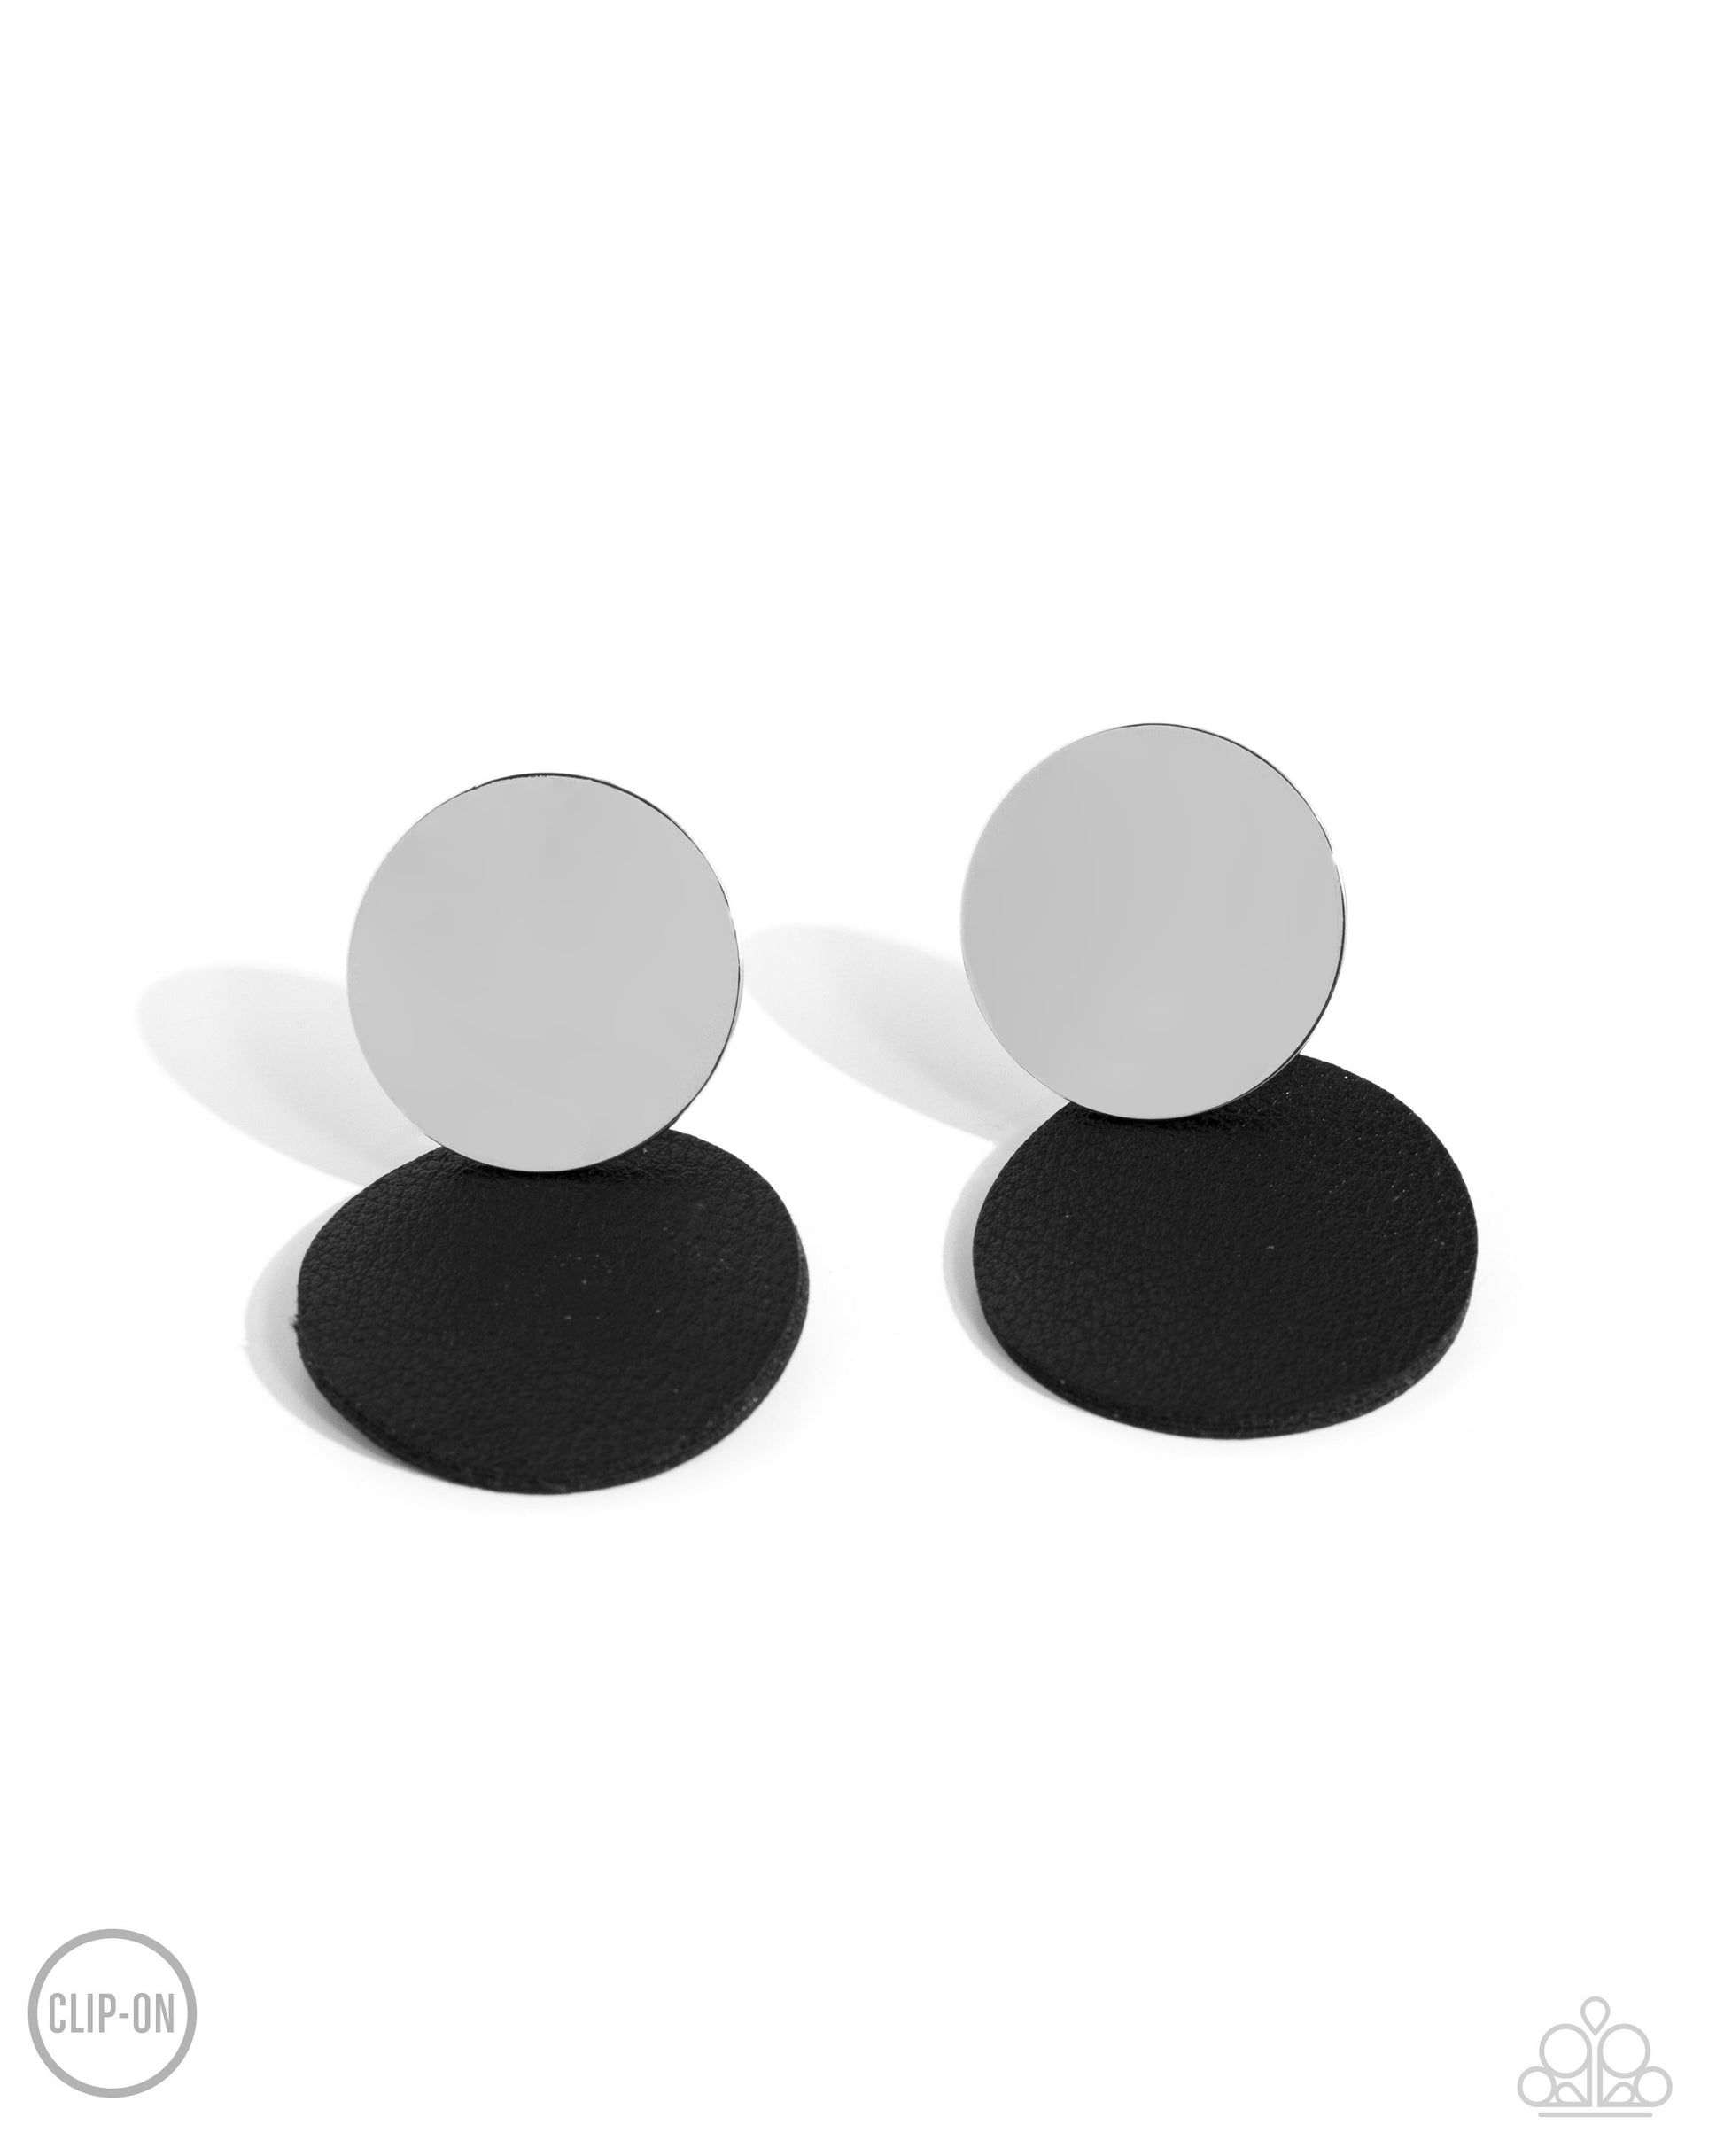 Paparazzi Accessories - Leather Leader - Black Clip-On Earrings an&nbsp;oversized silver disc gives way to an even larger disc of black leather for a badlands basic. Earring attaches to a standard clip-on fitting.  Sold as one pair of clip-on earrings.